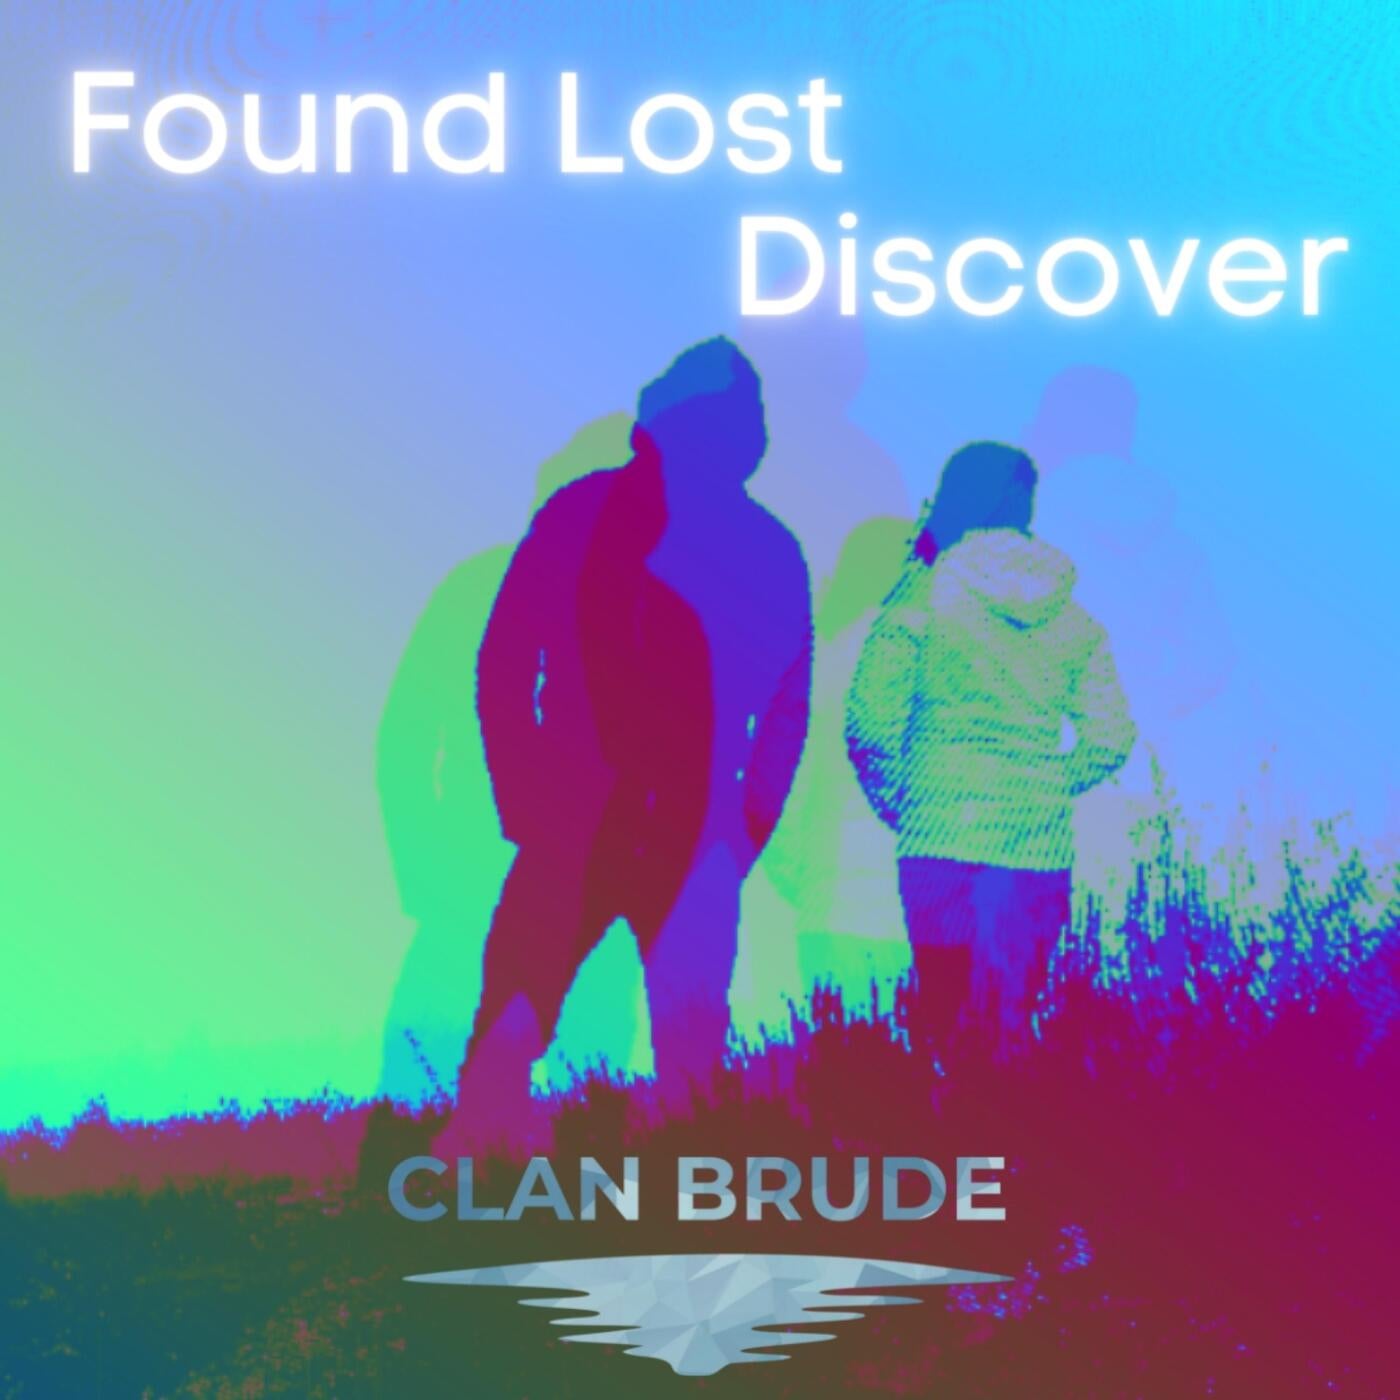 Discovery Clan. Discover found out